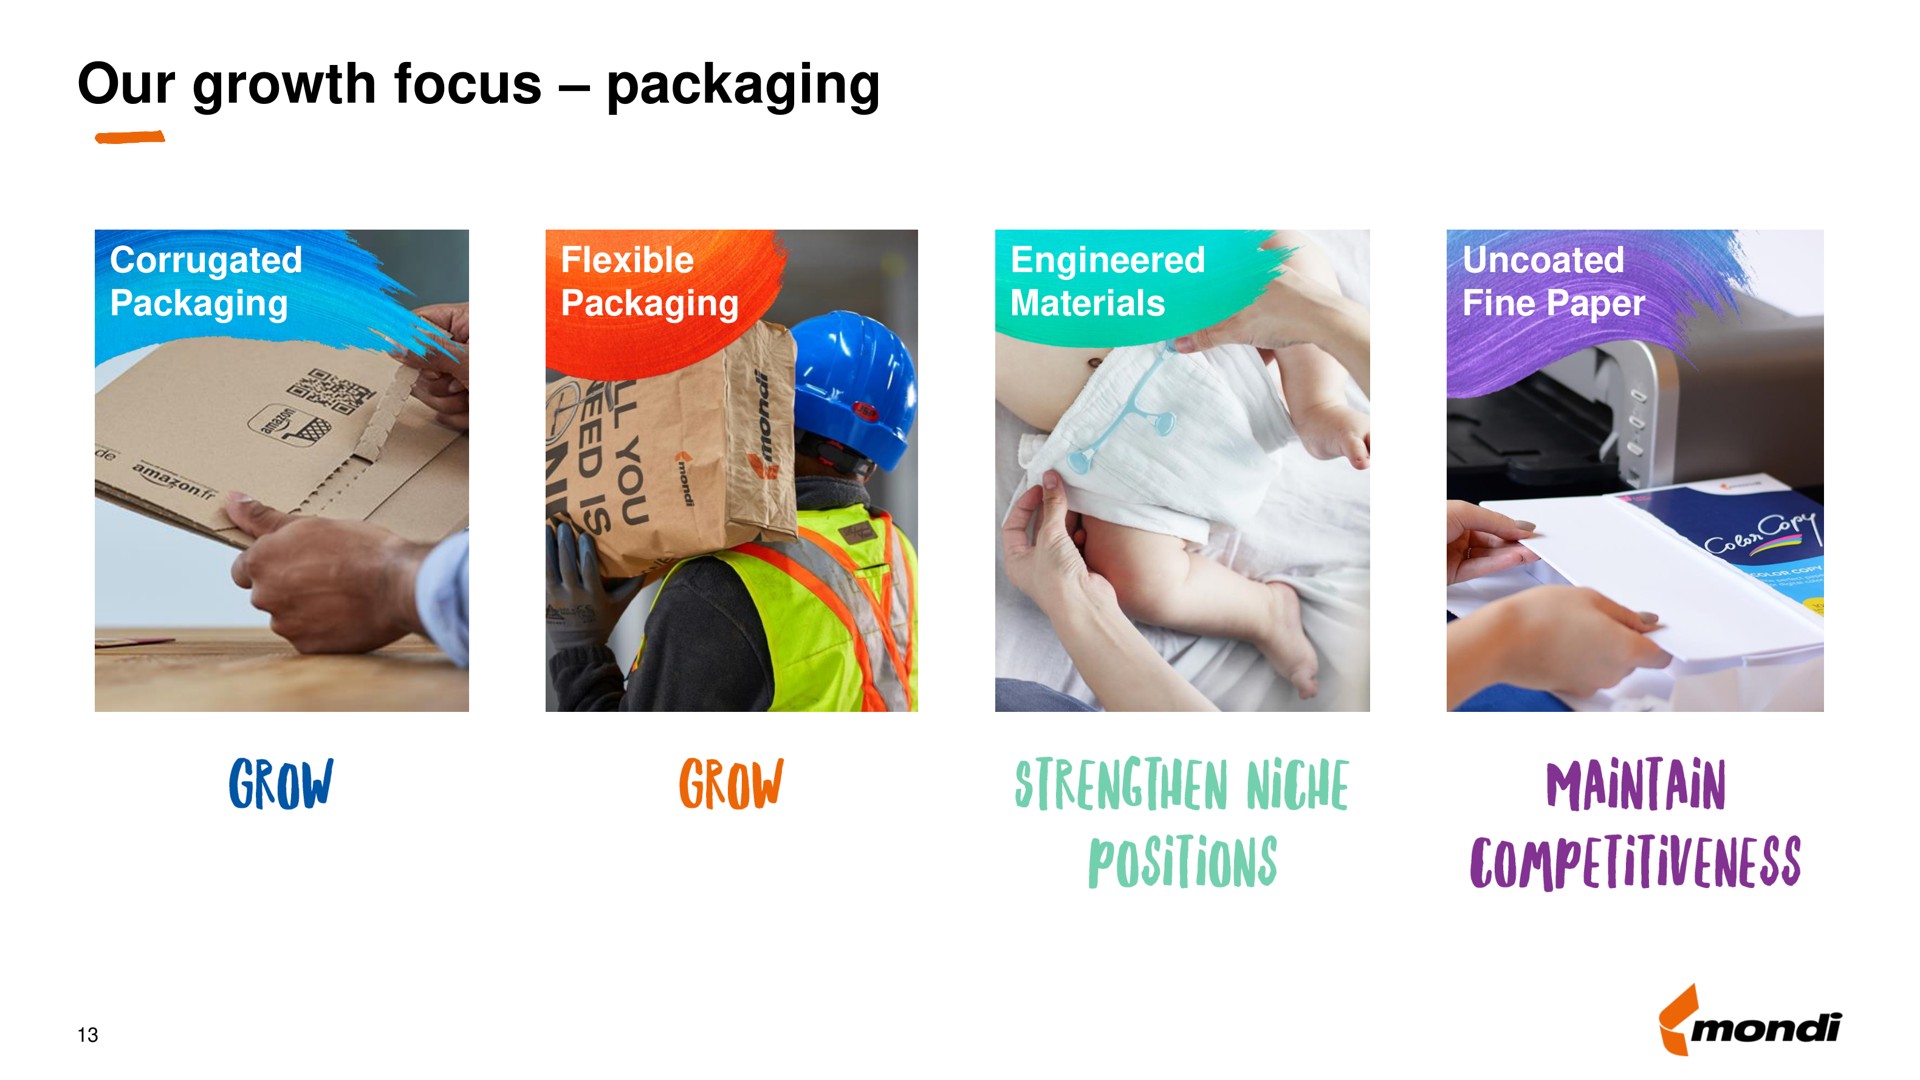 our growth focus packaging grow strengthen niche positions maintain competitiveness | Mondi